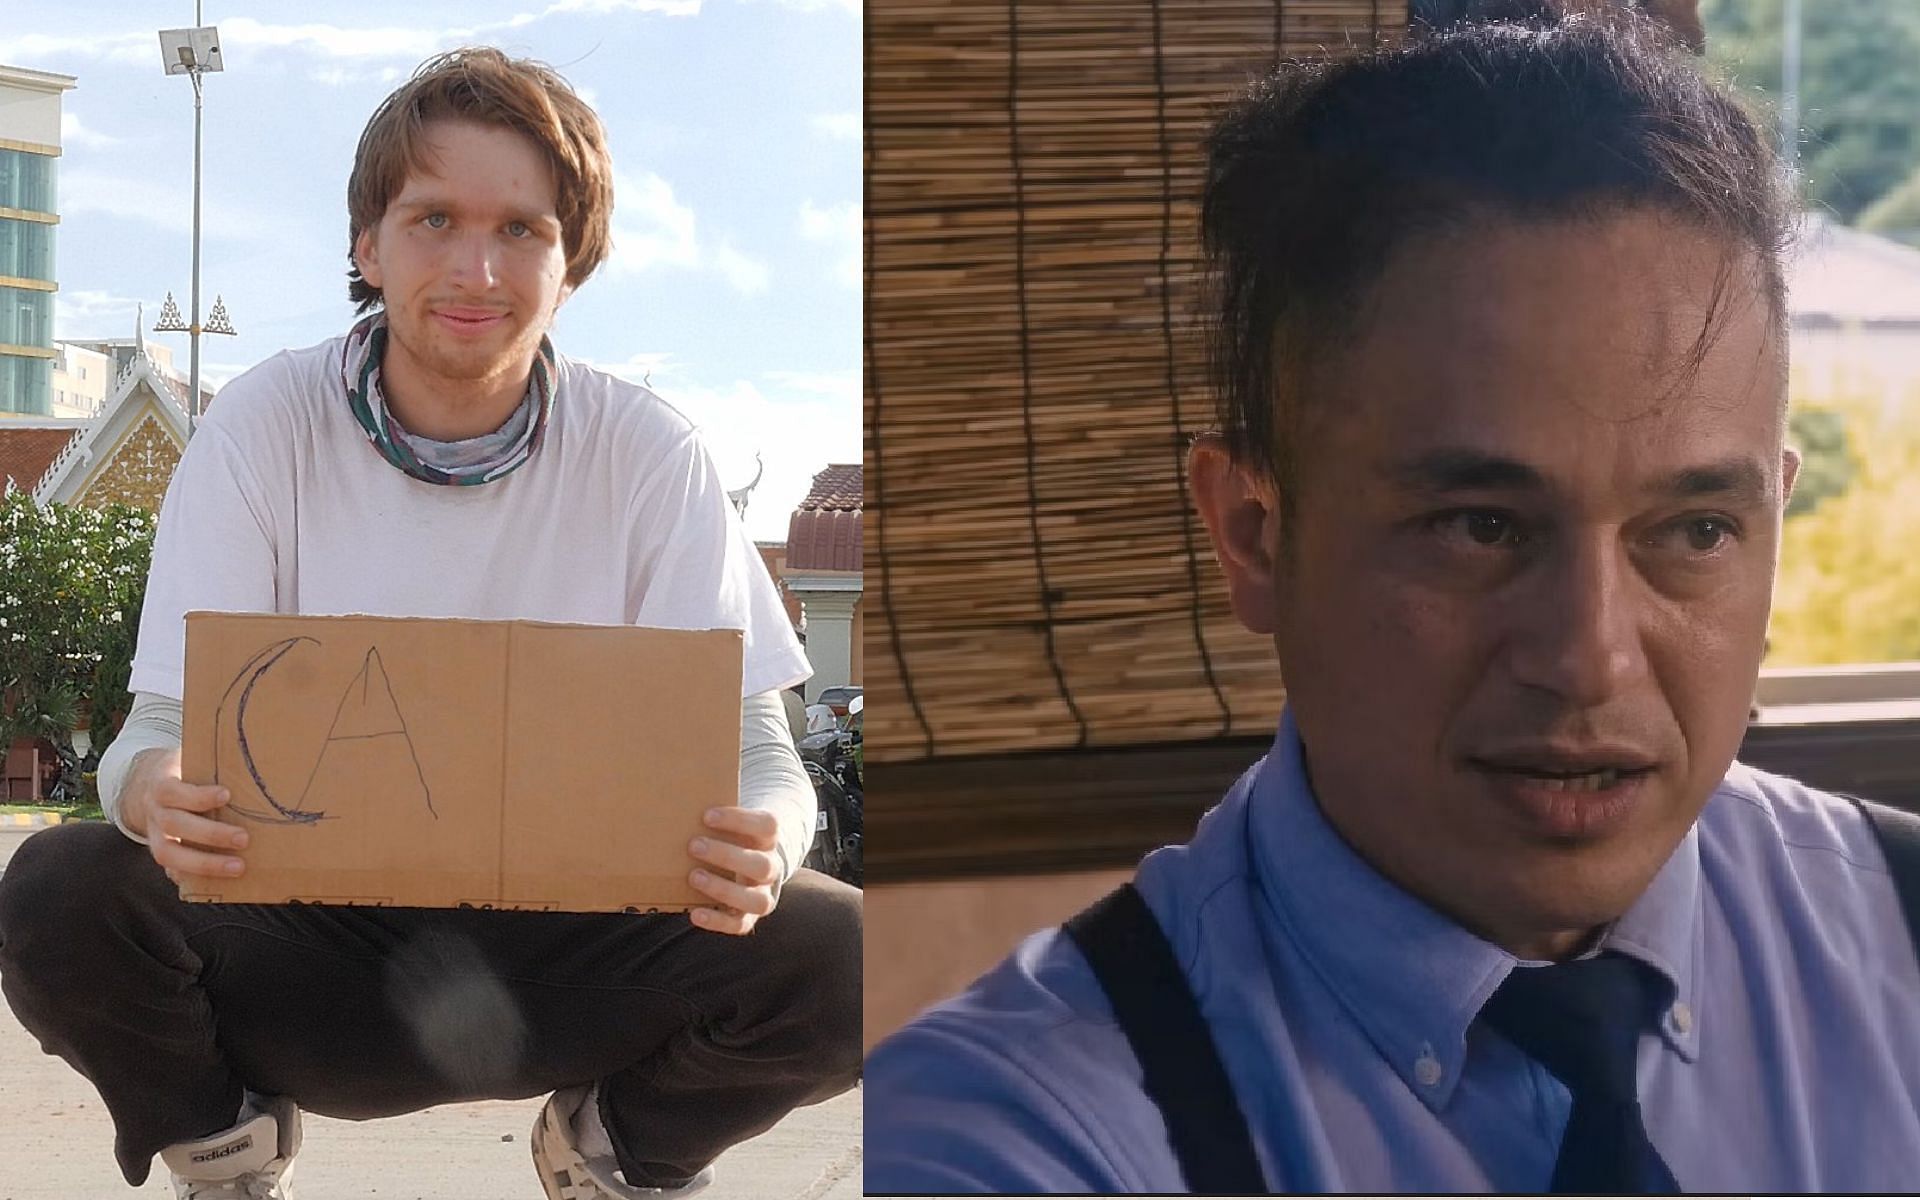 Slightly Homeless and Suspendas went viral after getting allegedly imprisoned in Nepal (Image via Slightly Homeless/Twitter and Sportskeeda)